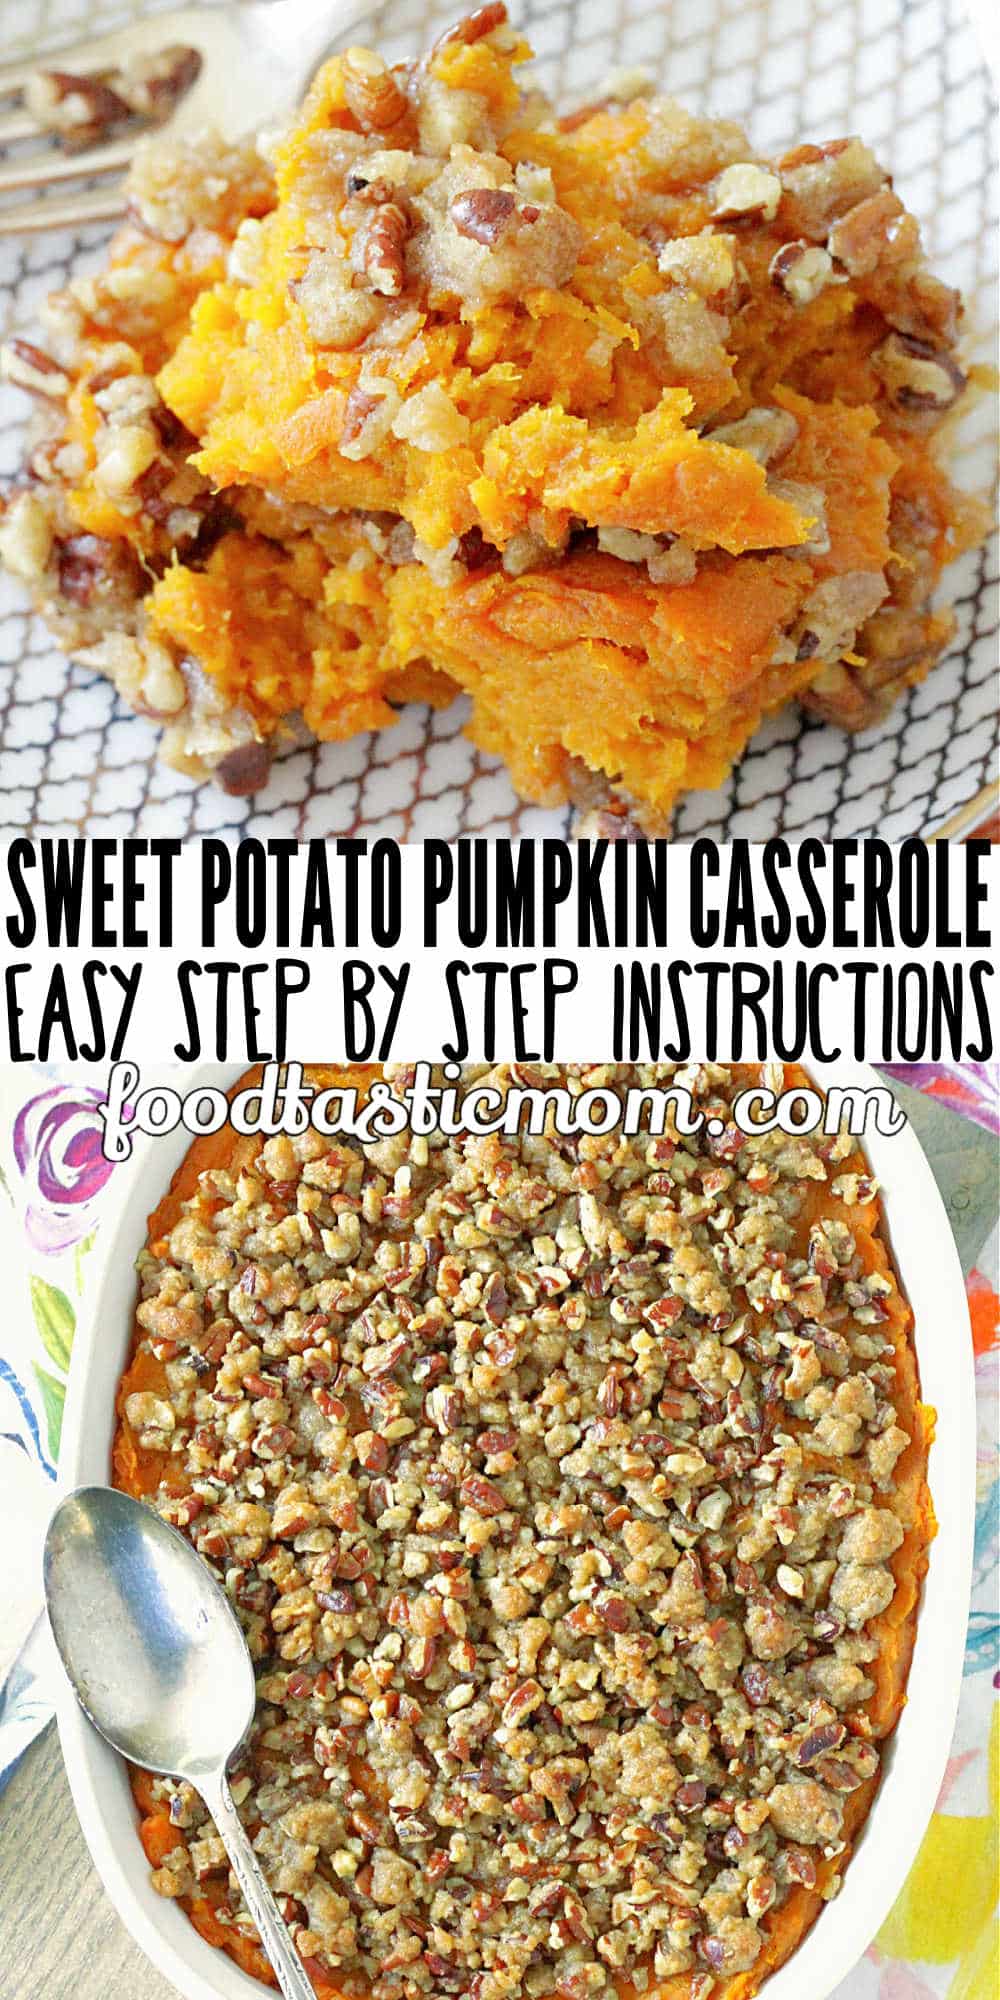 Sweet Potato Pumpkin Casserole is an even better version of one of the most popular Thanksgiving side dishes. via @foodtasticmom